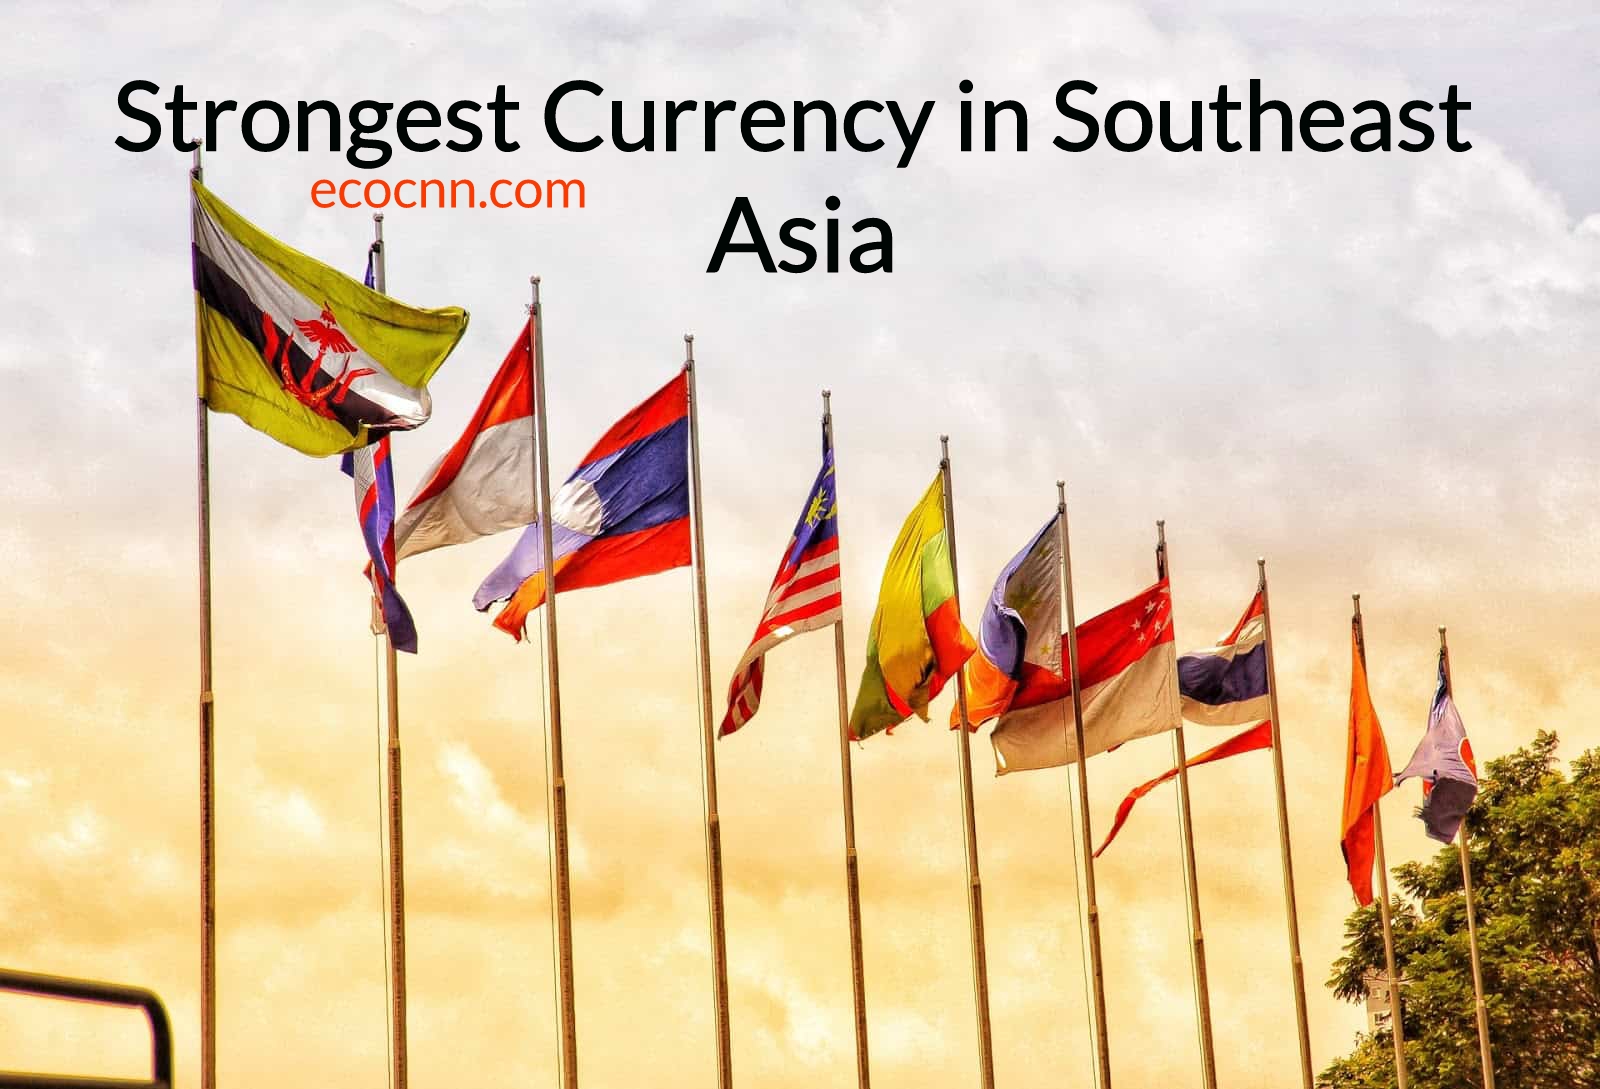 Top 5 strongest currencies in Southeast Asia 2022